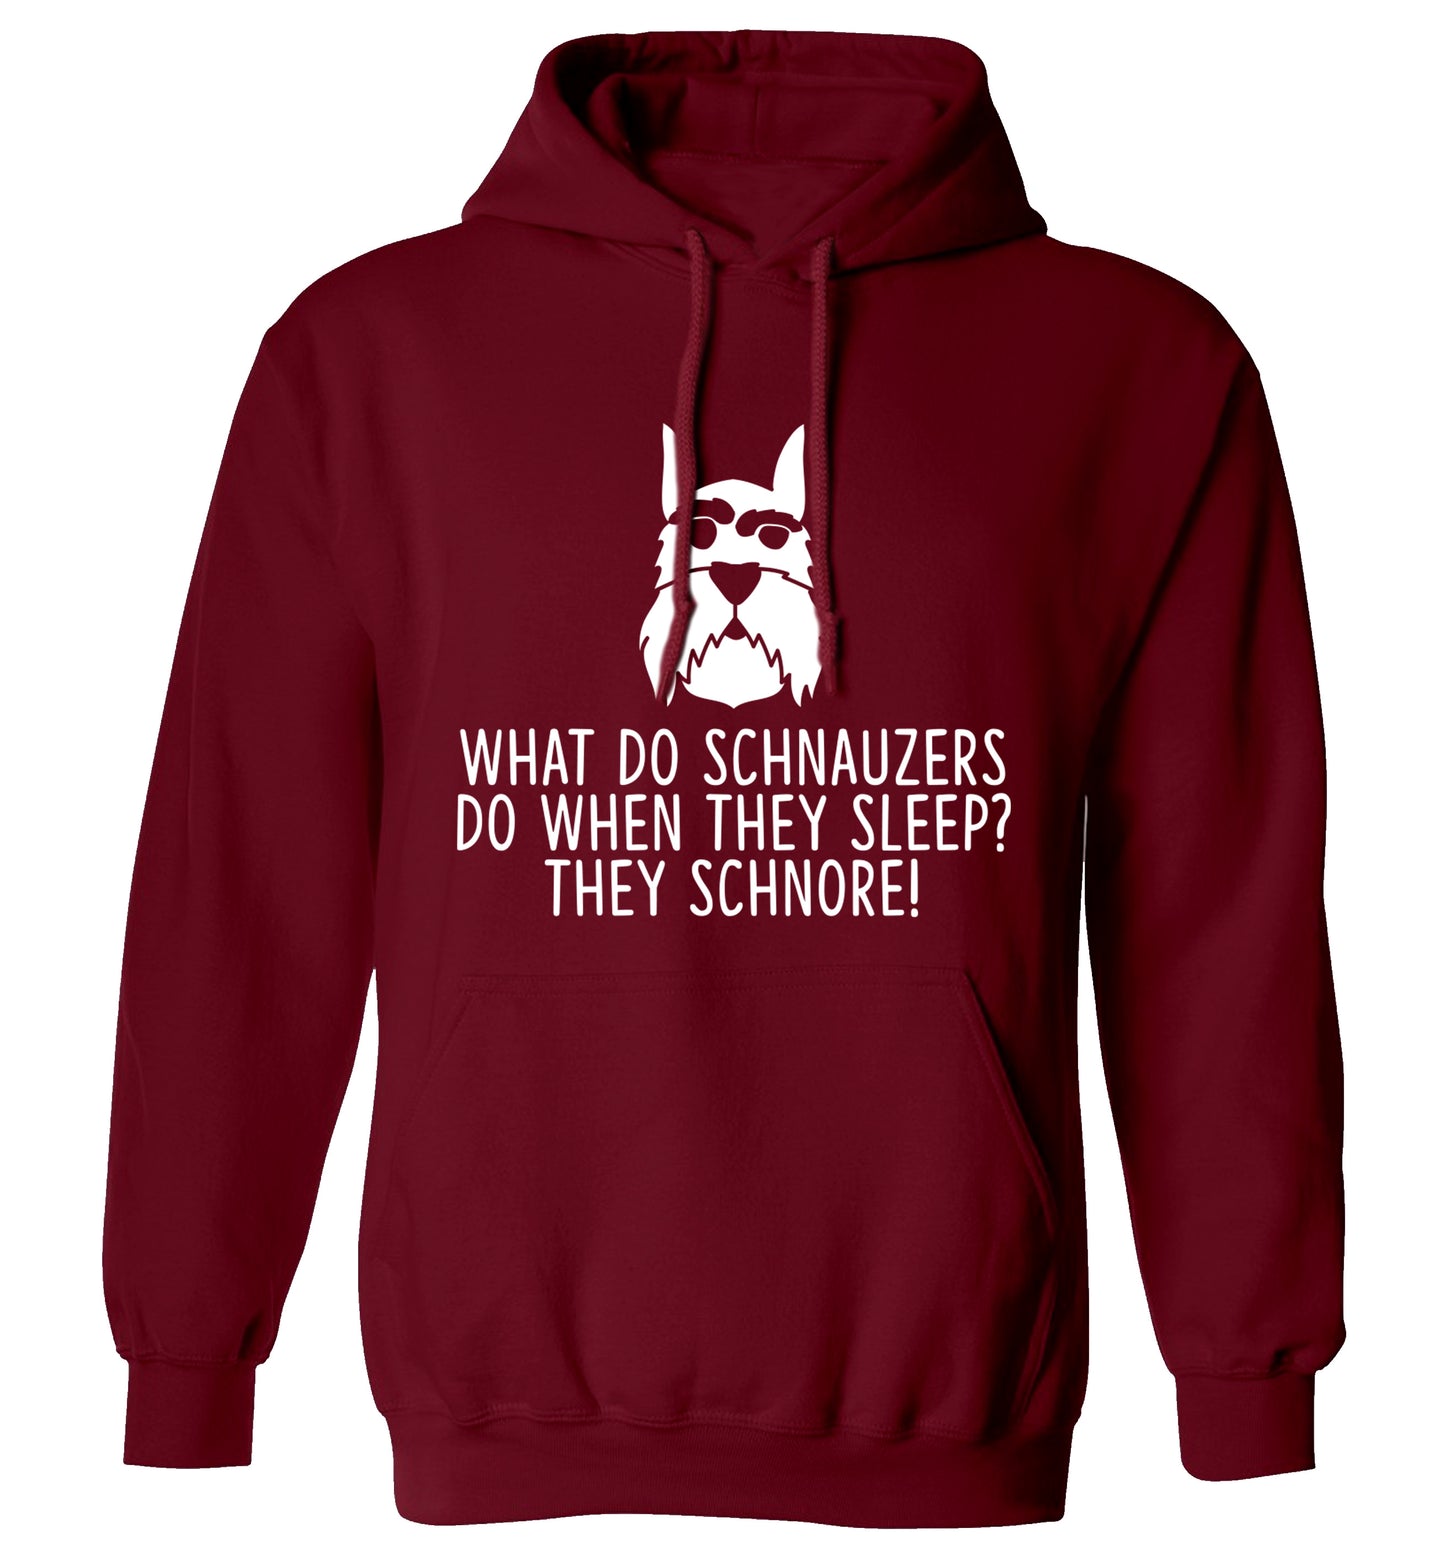 What do schnauzers do when they sleep? Schnore! adults unisex maroon hoodie 2XL